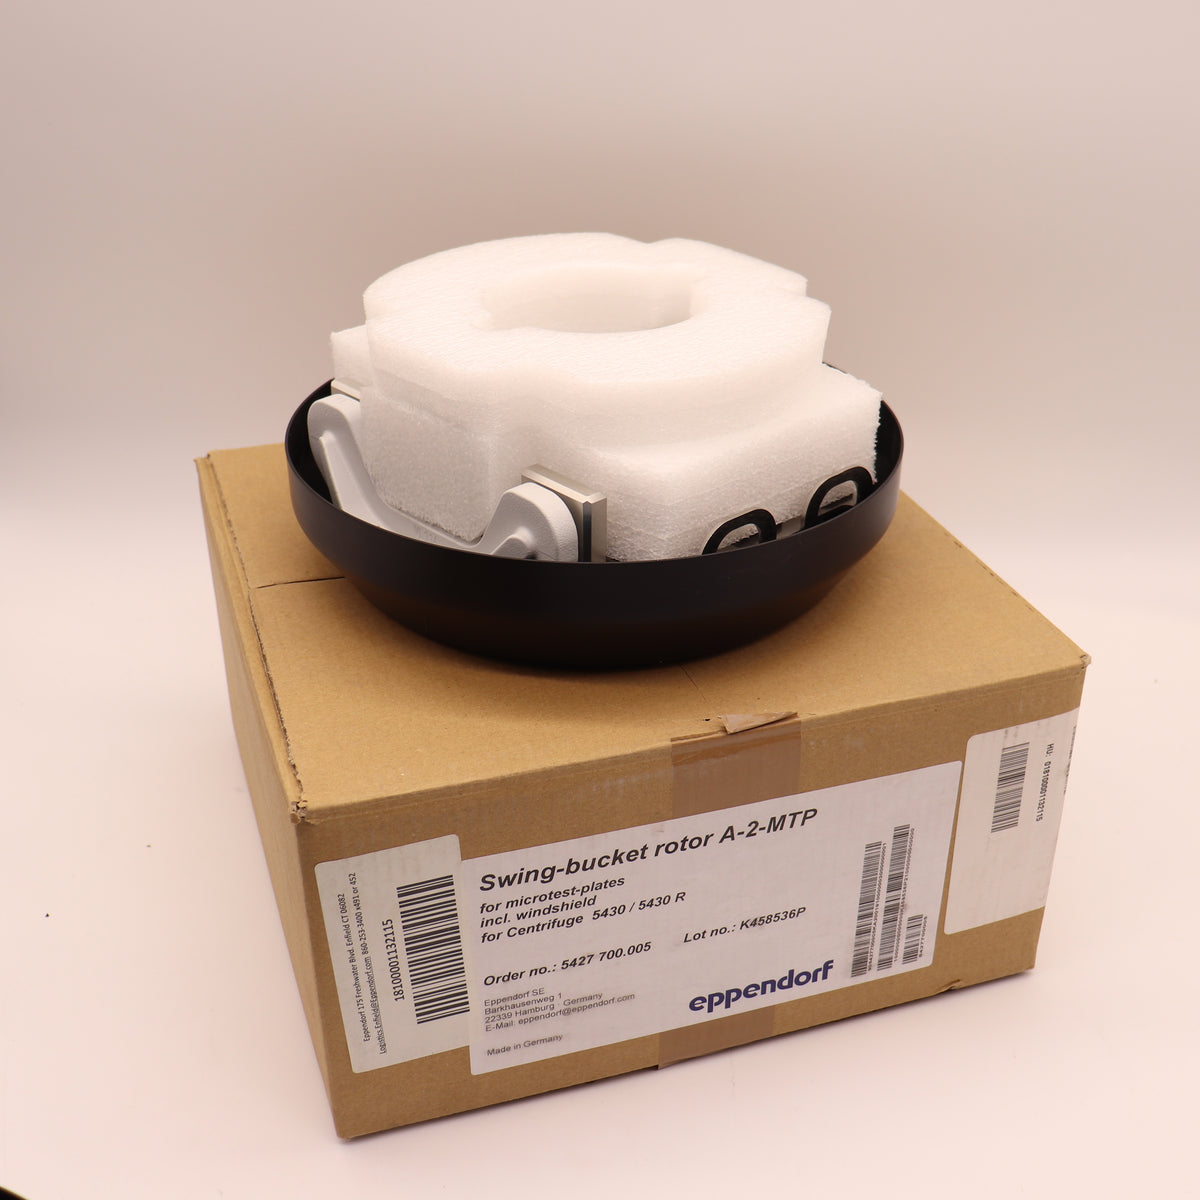 Eppendorf 5430 5430R Centrifuge Swing Bucket Rotor A-2-MTP